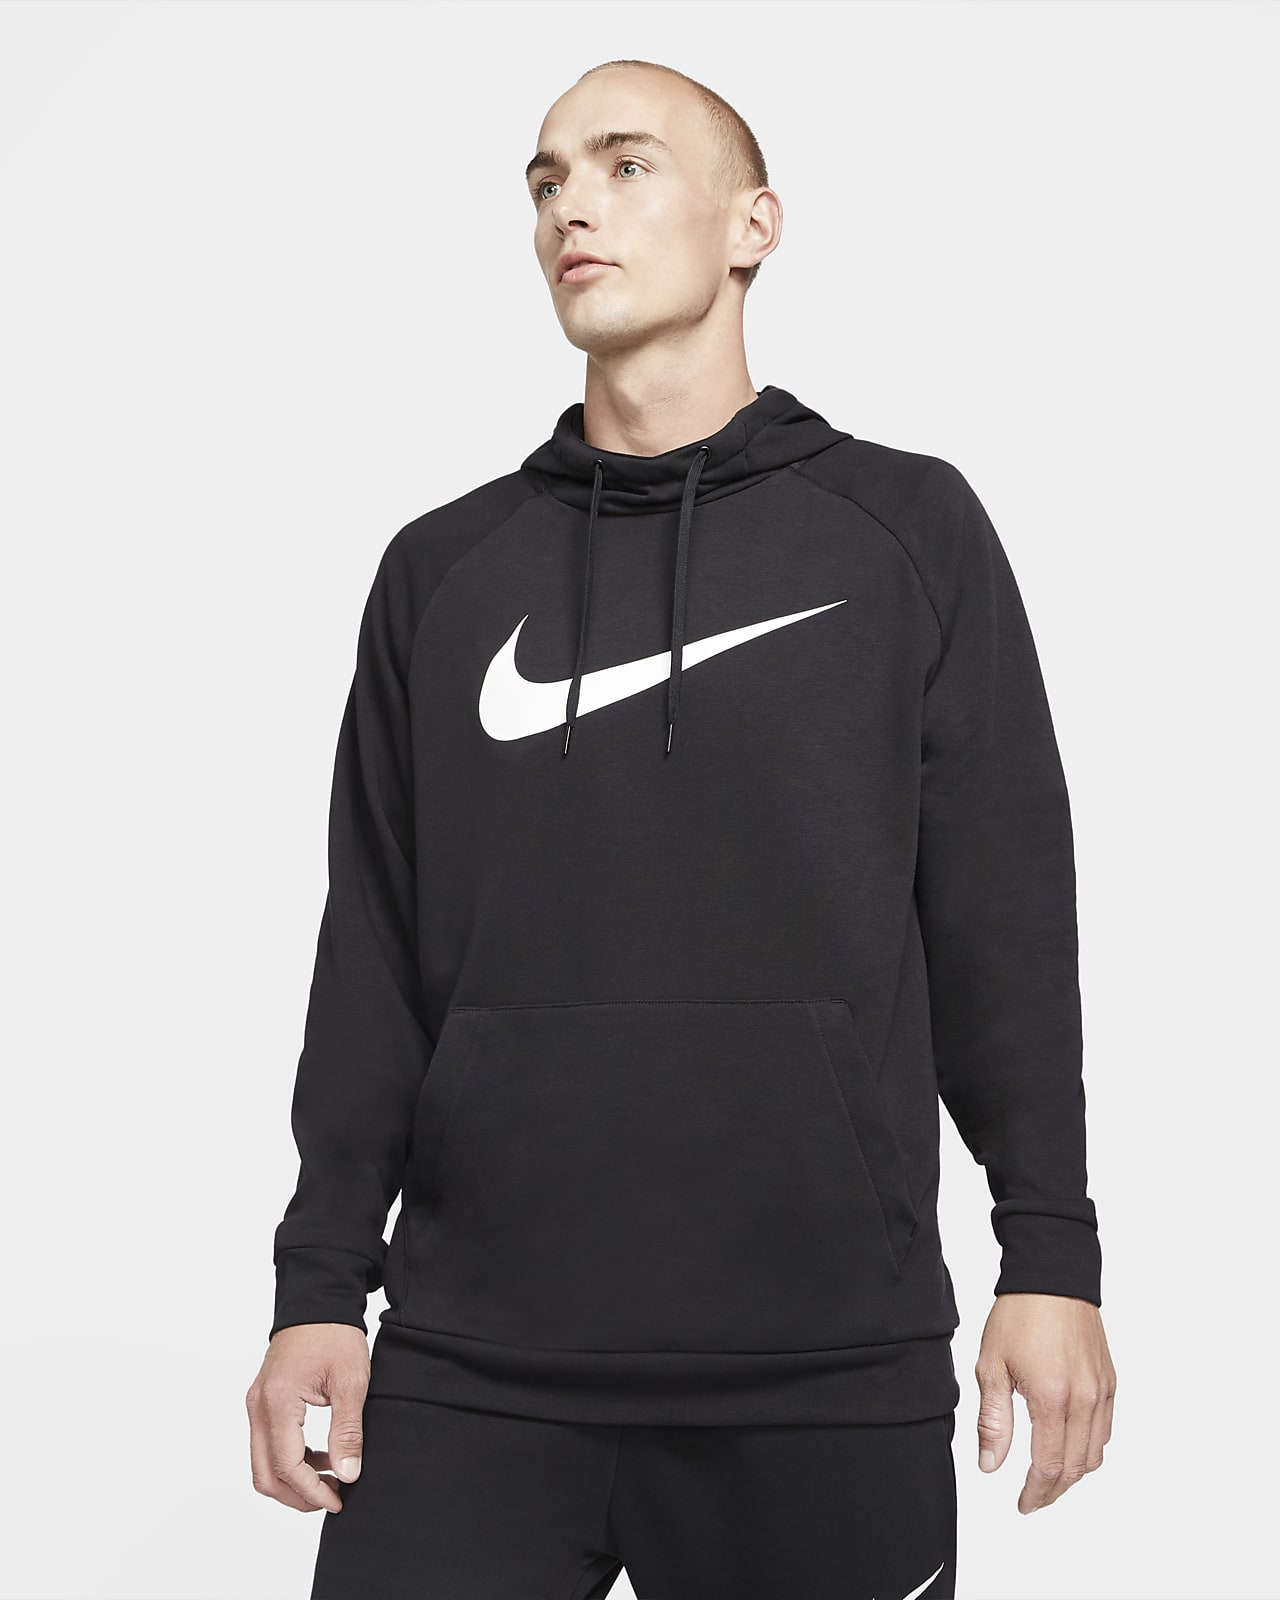 Manifold Mobilize Appointment Nike Dri-FIT Men's Pullover Training Hoodie. Nike.com